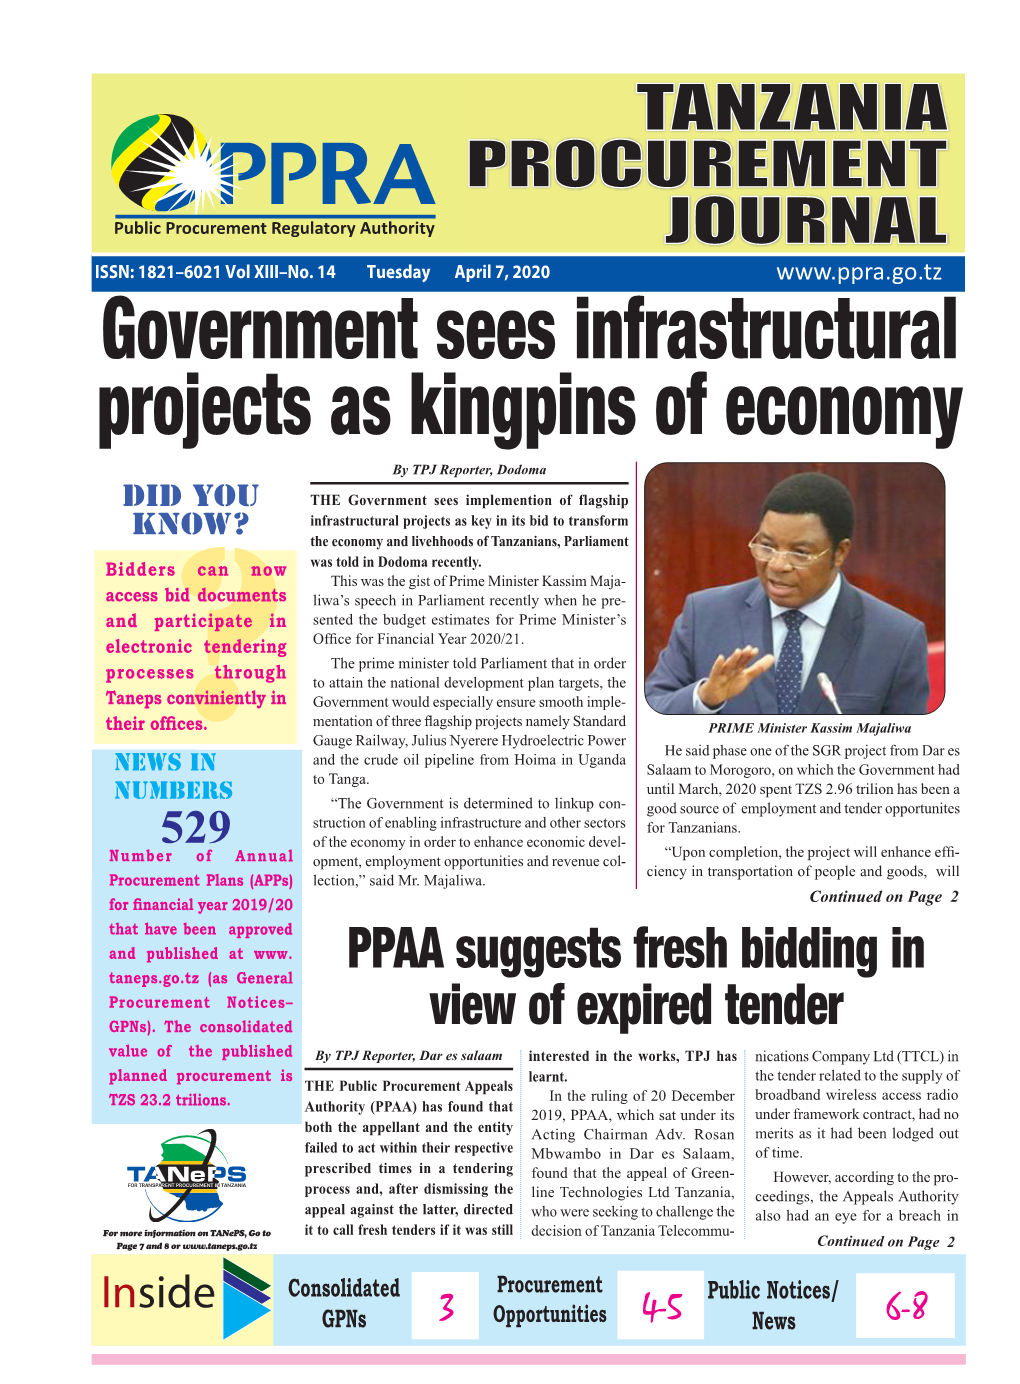 Government Sees Infrastructural Projects As Kingpins of Economy